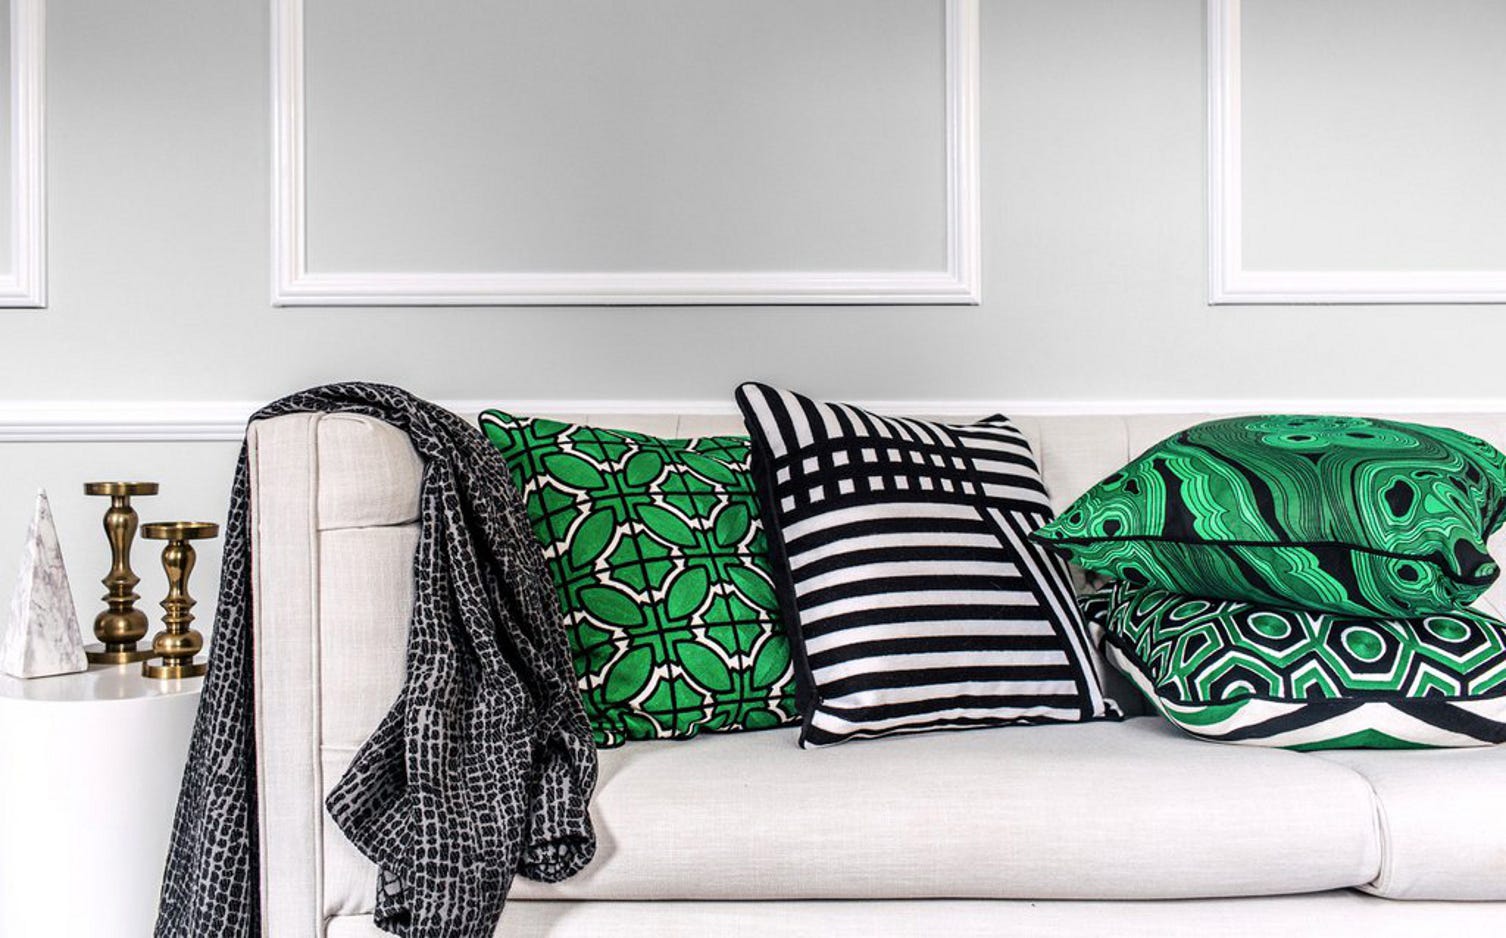 Products from Natale's accessories line include throws (textured black and white) and pillows (printed in geometric, striped, marbled patterns).